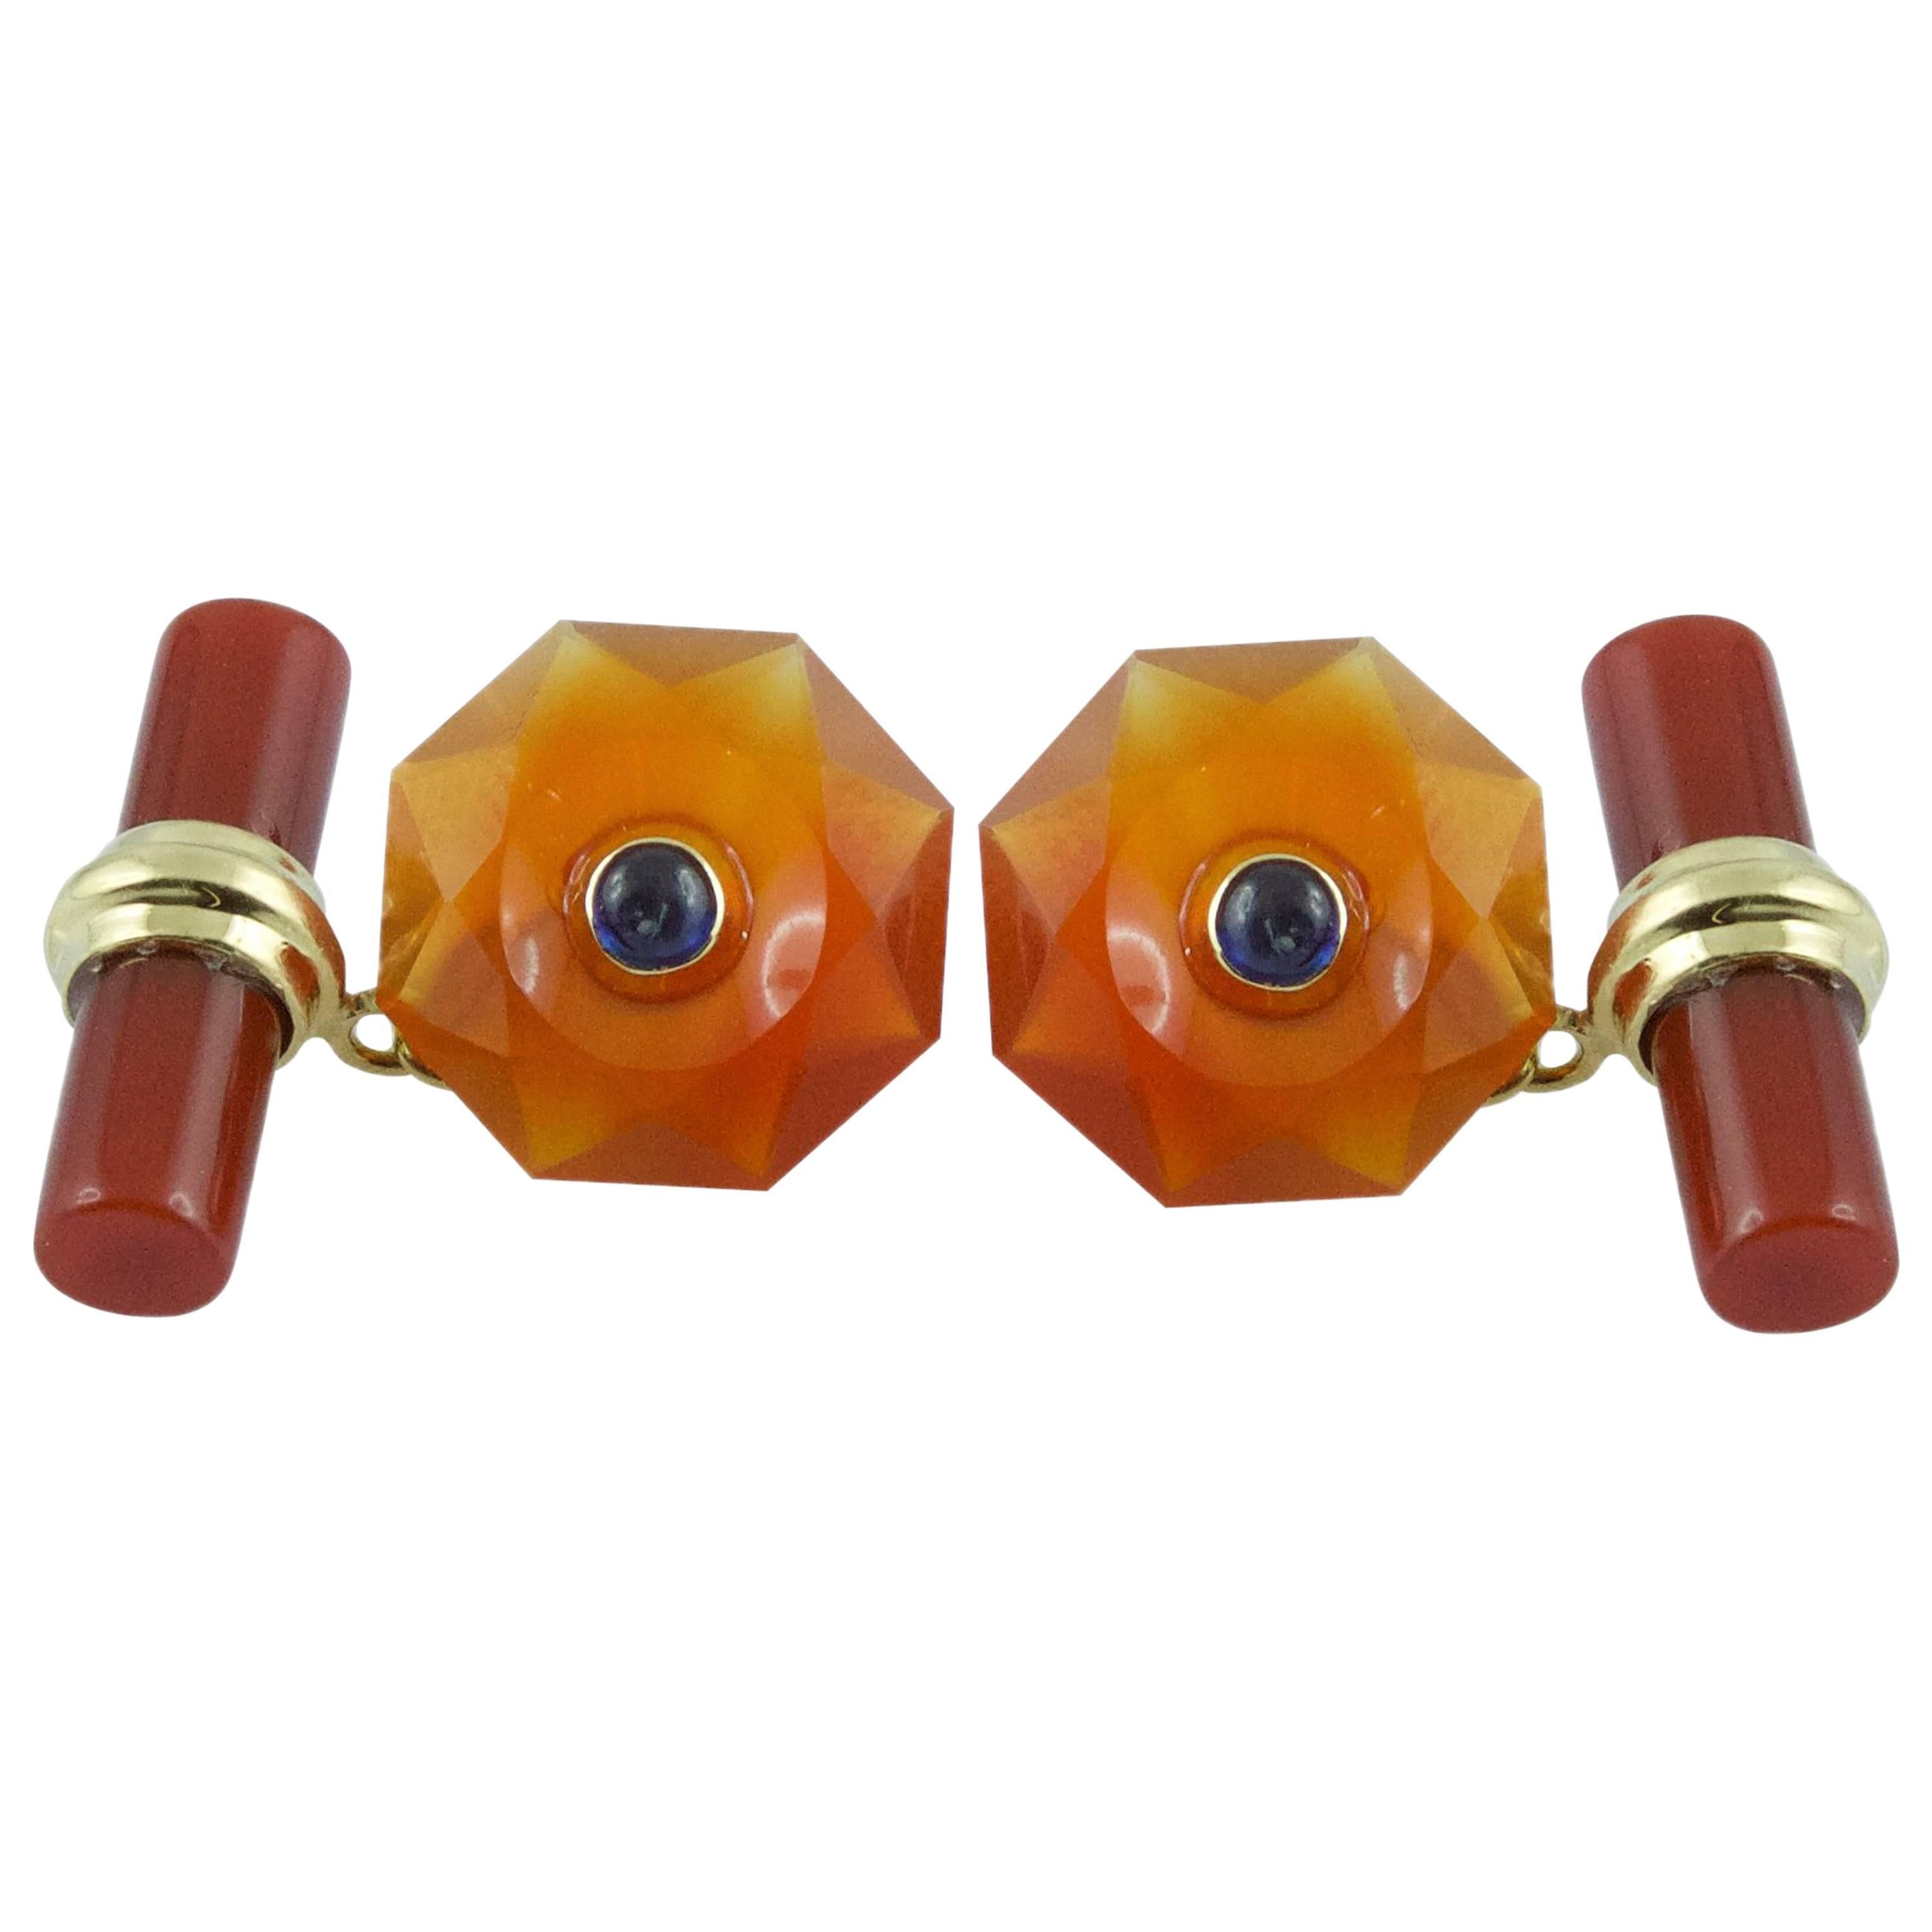 Gold Cufflinks in Carnelian with Sapphires